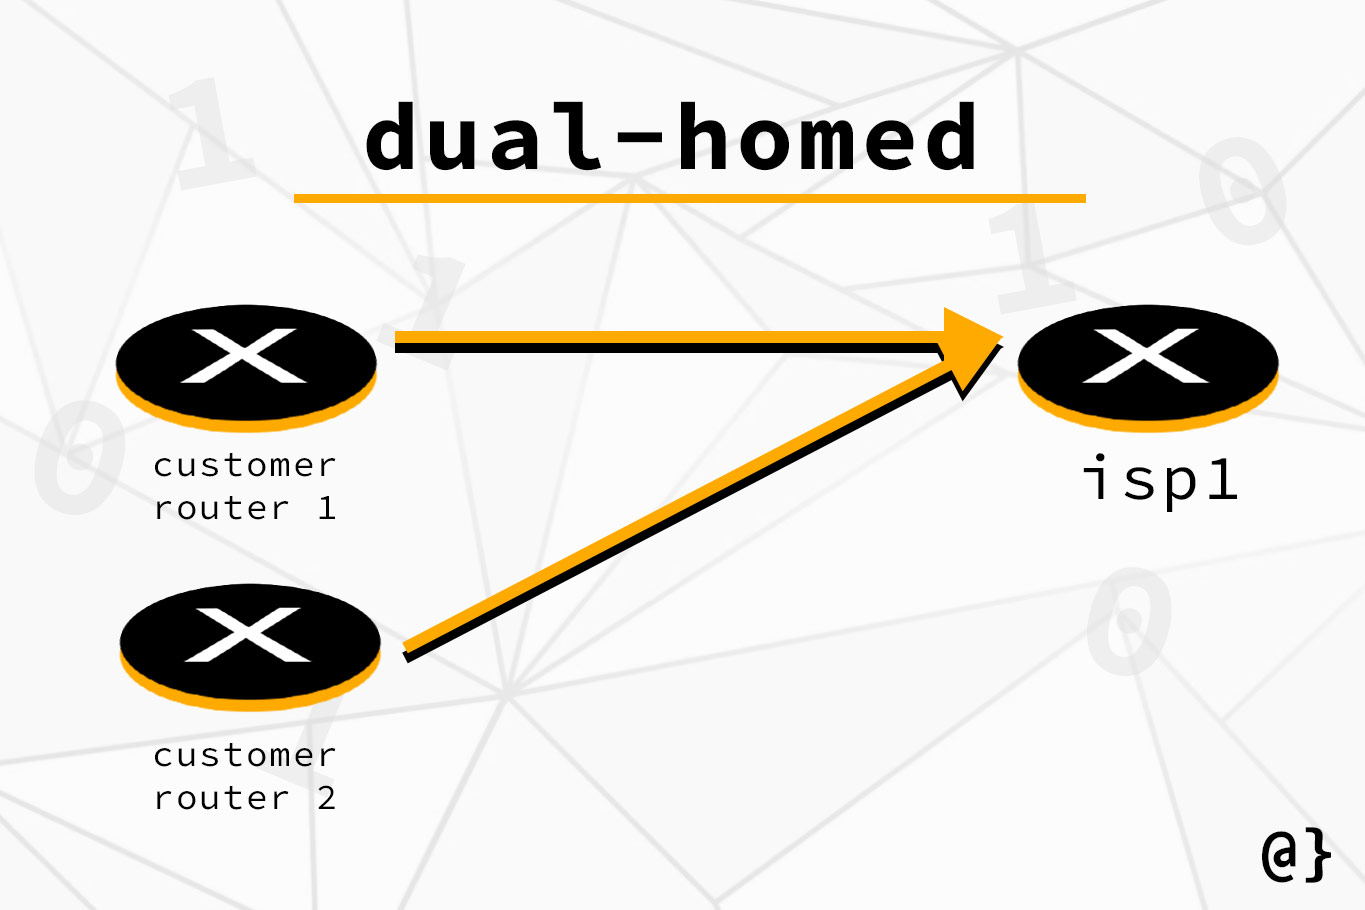 dual homed network access